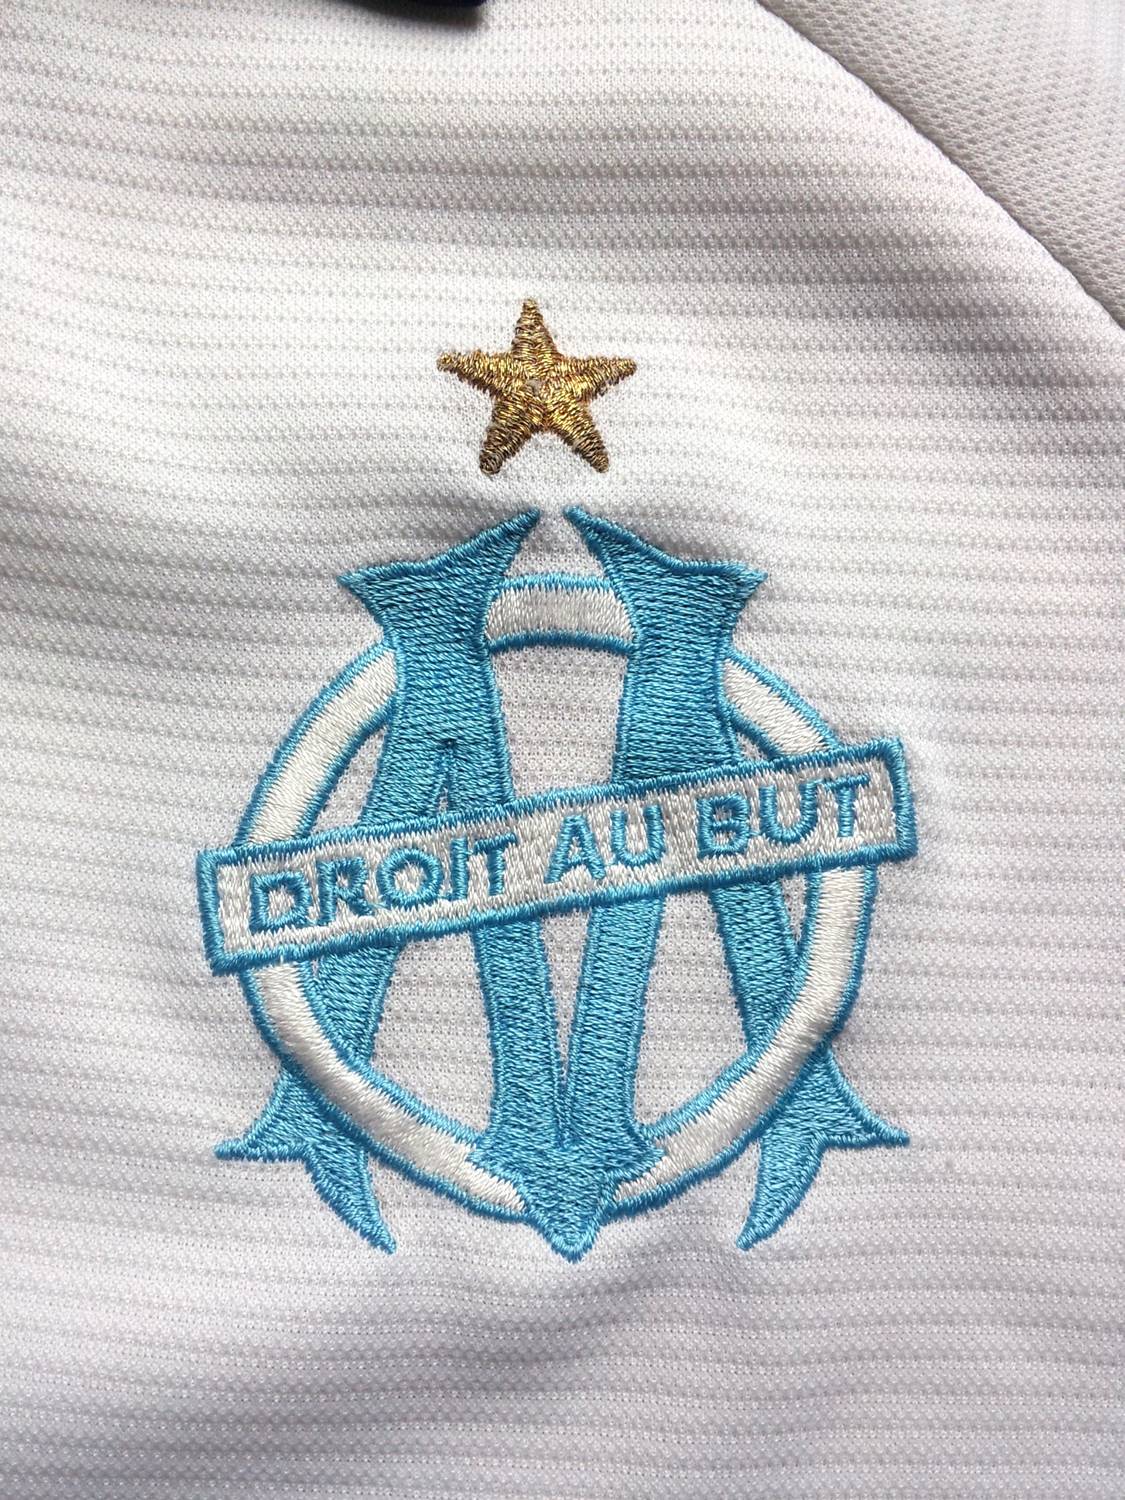 Olympique Marseille Home football shirt 1999 - 2000. Sponsored by Ericsson